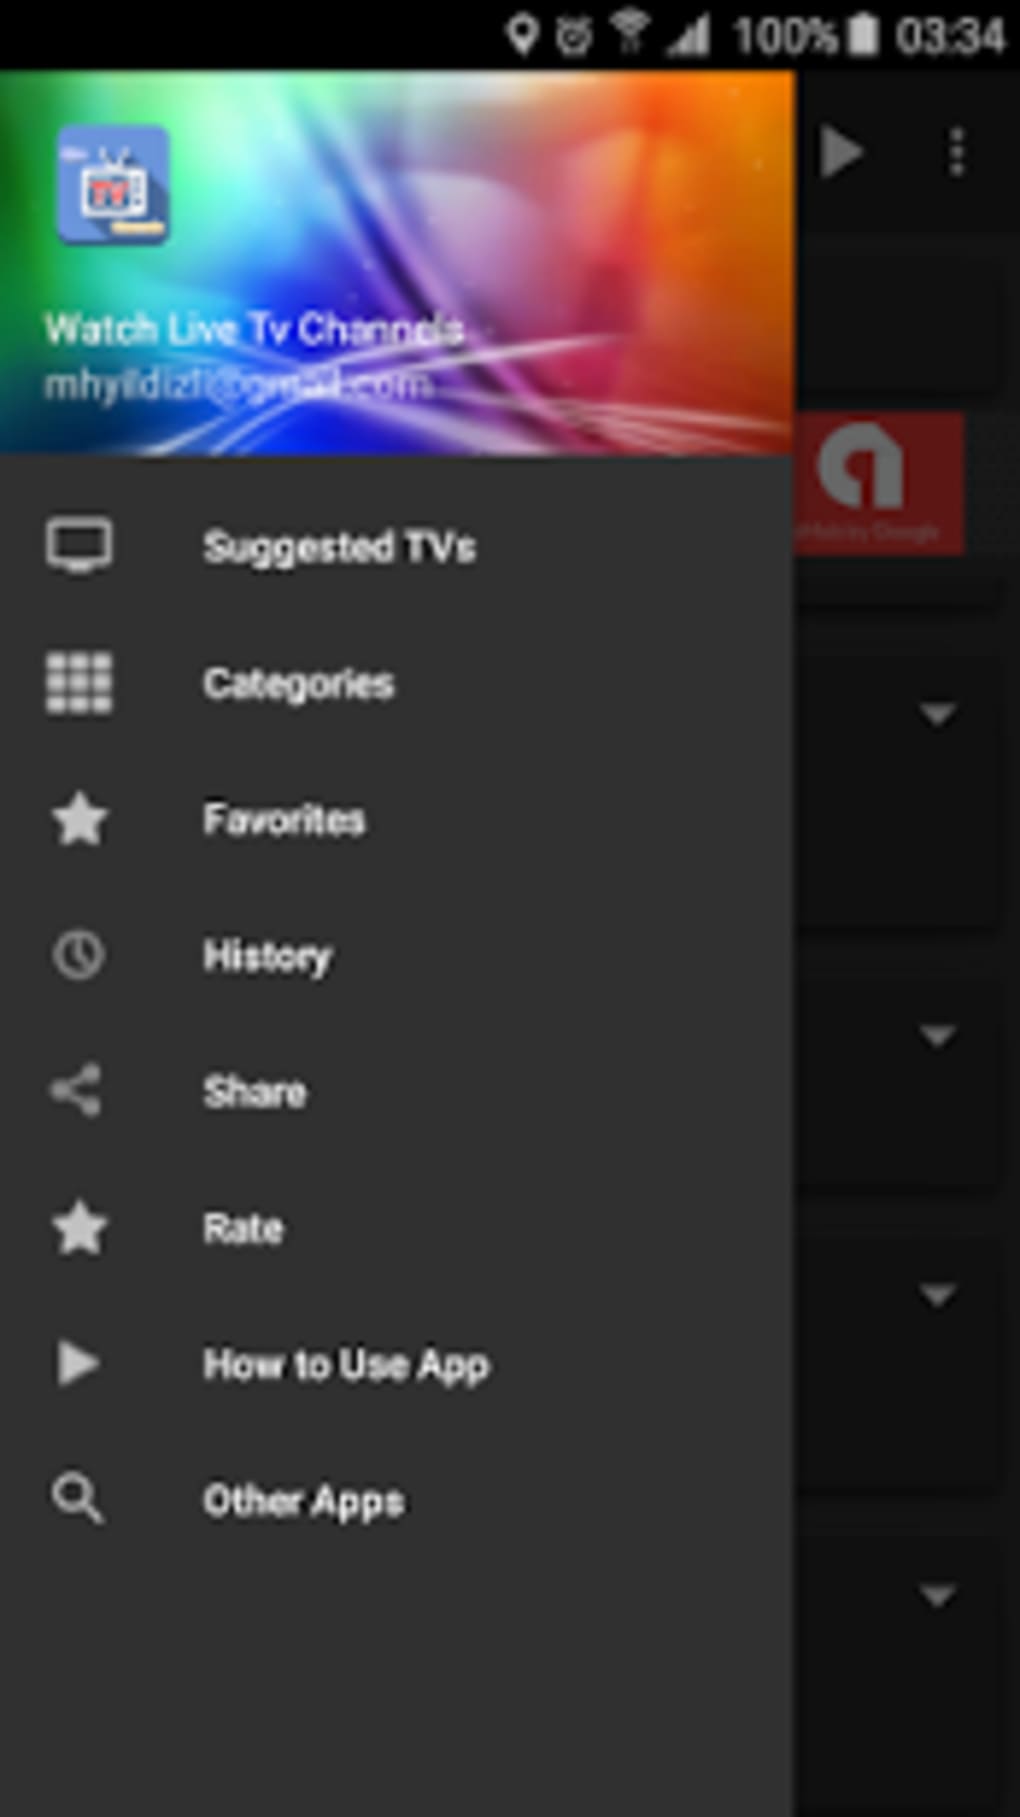 live nettv 4.7.4 apk download for android